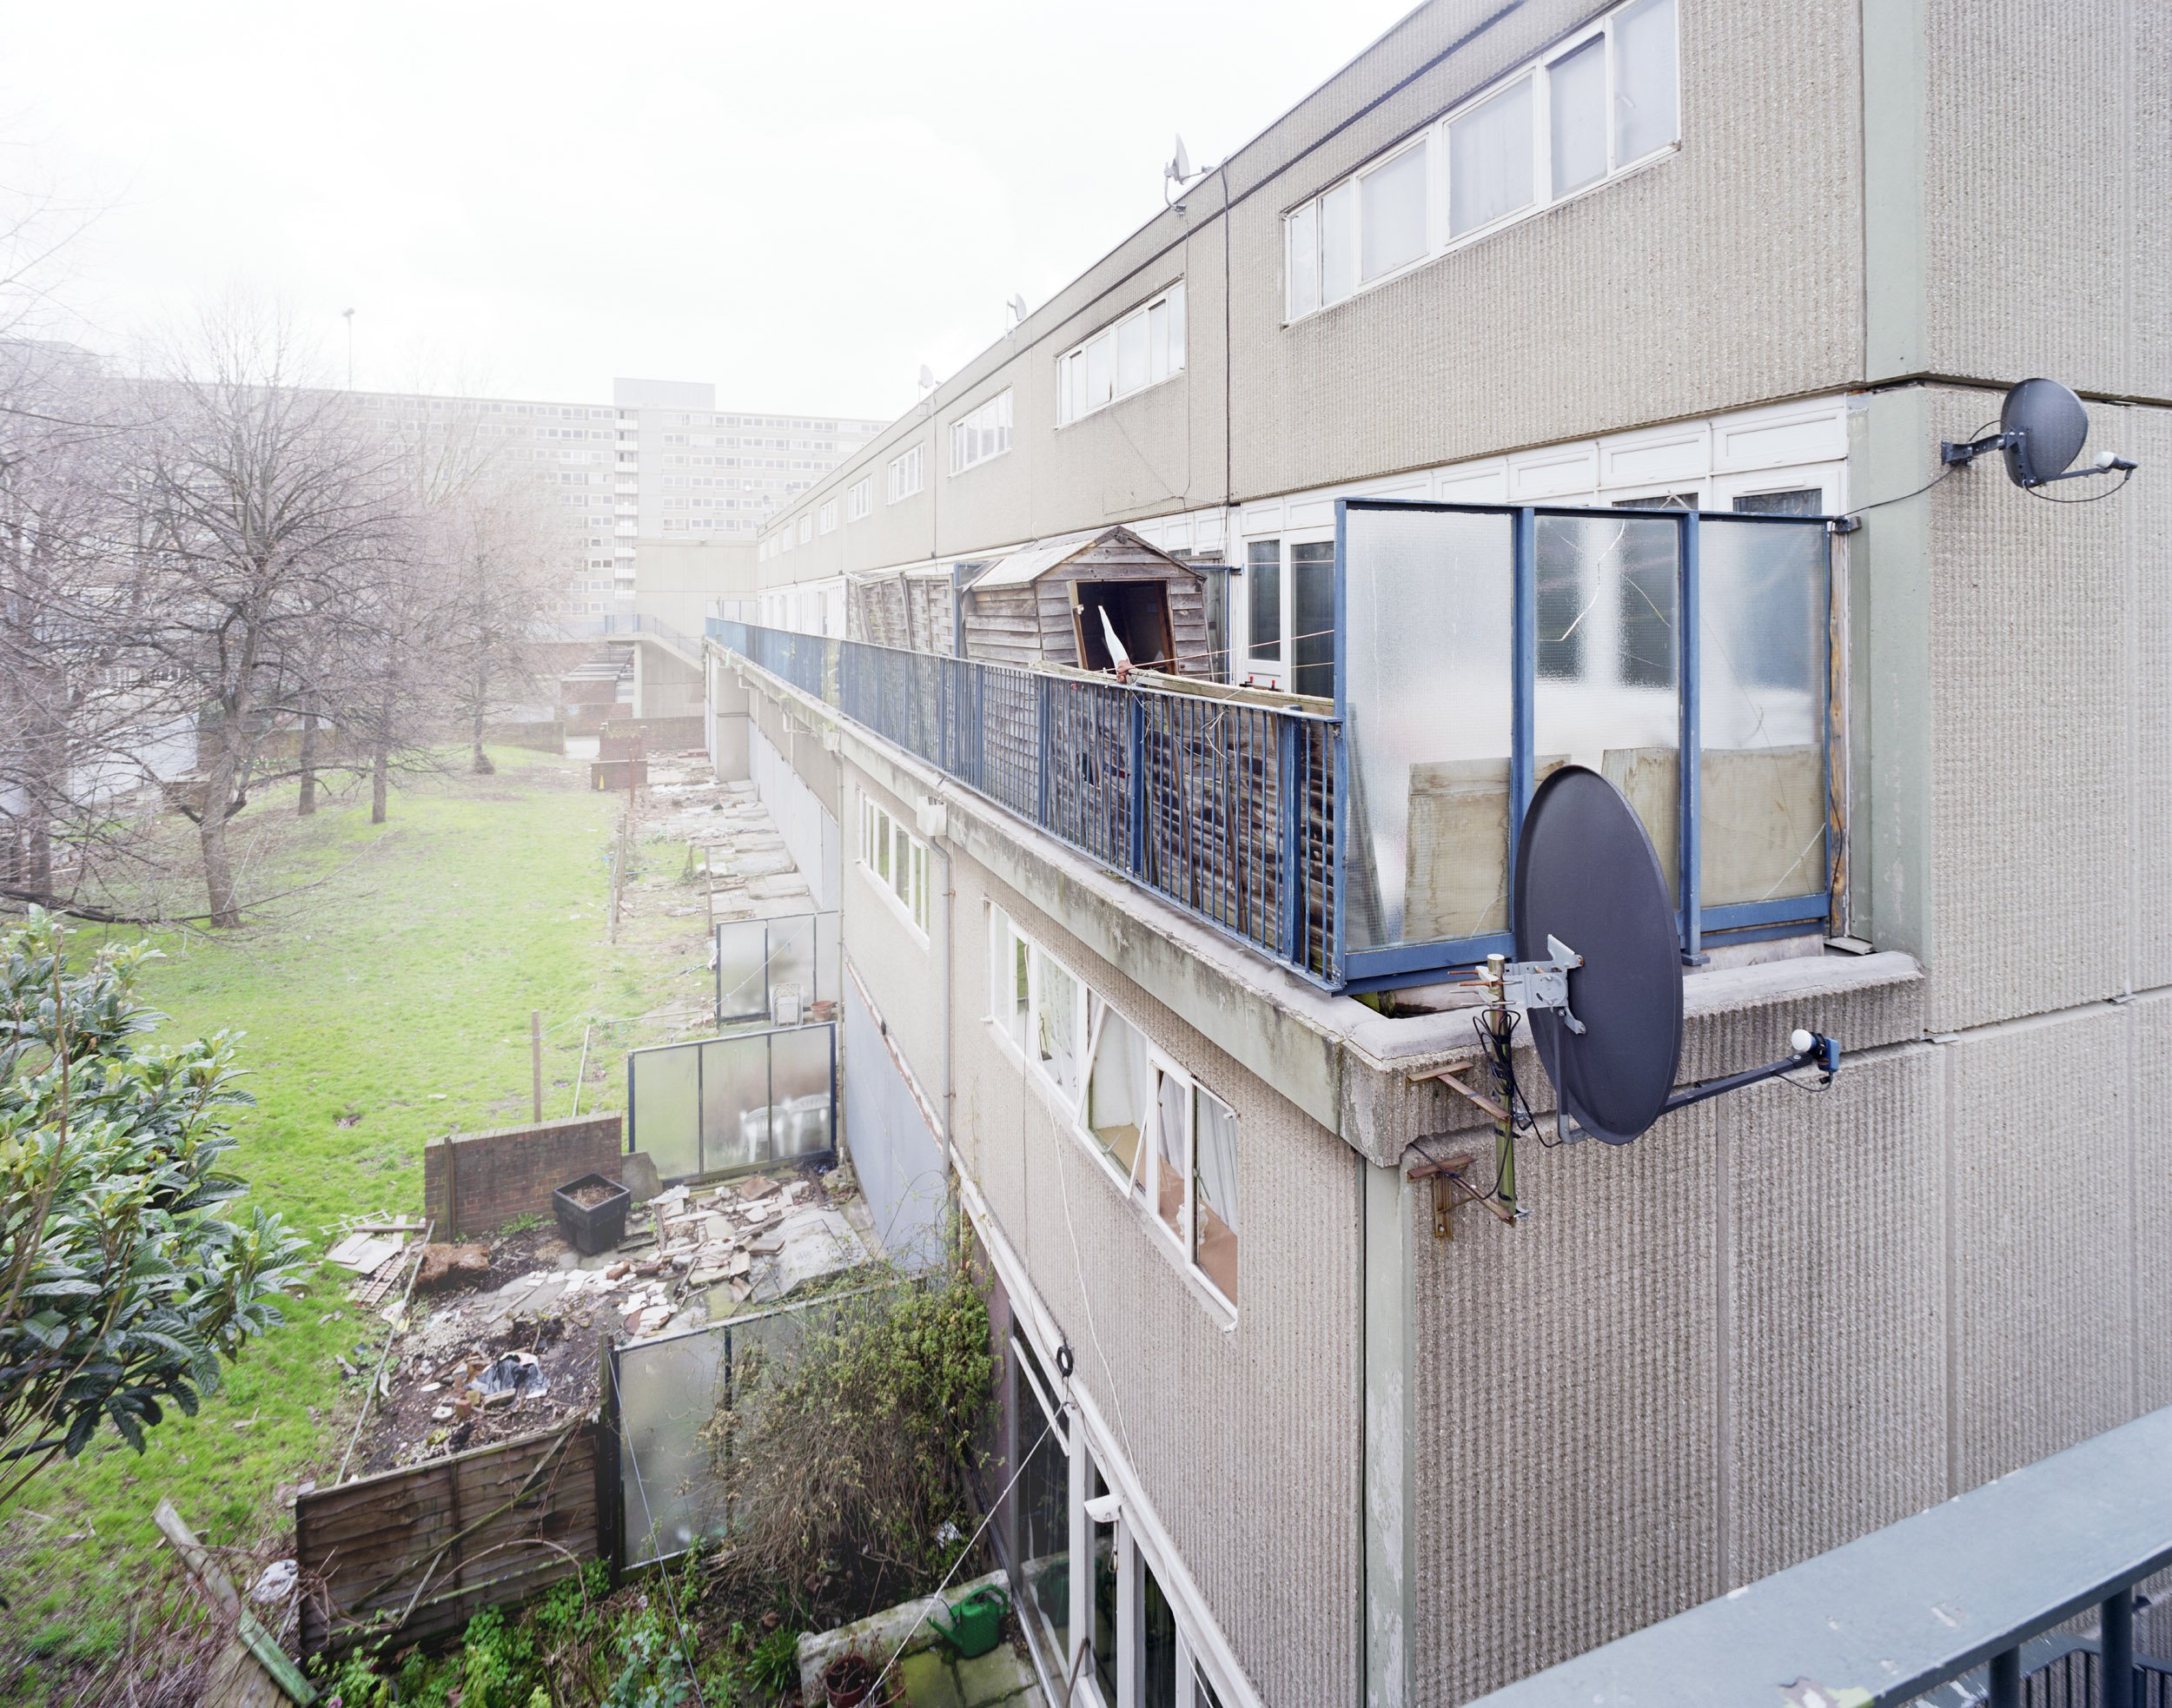 heygate-abstracted-simon-kennedy-mass-collective-photography-architecture-00010.jpg